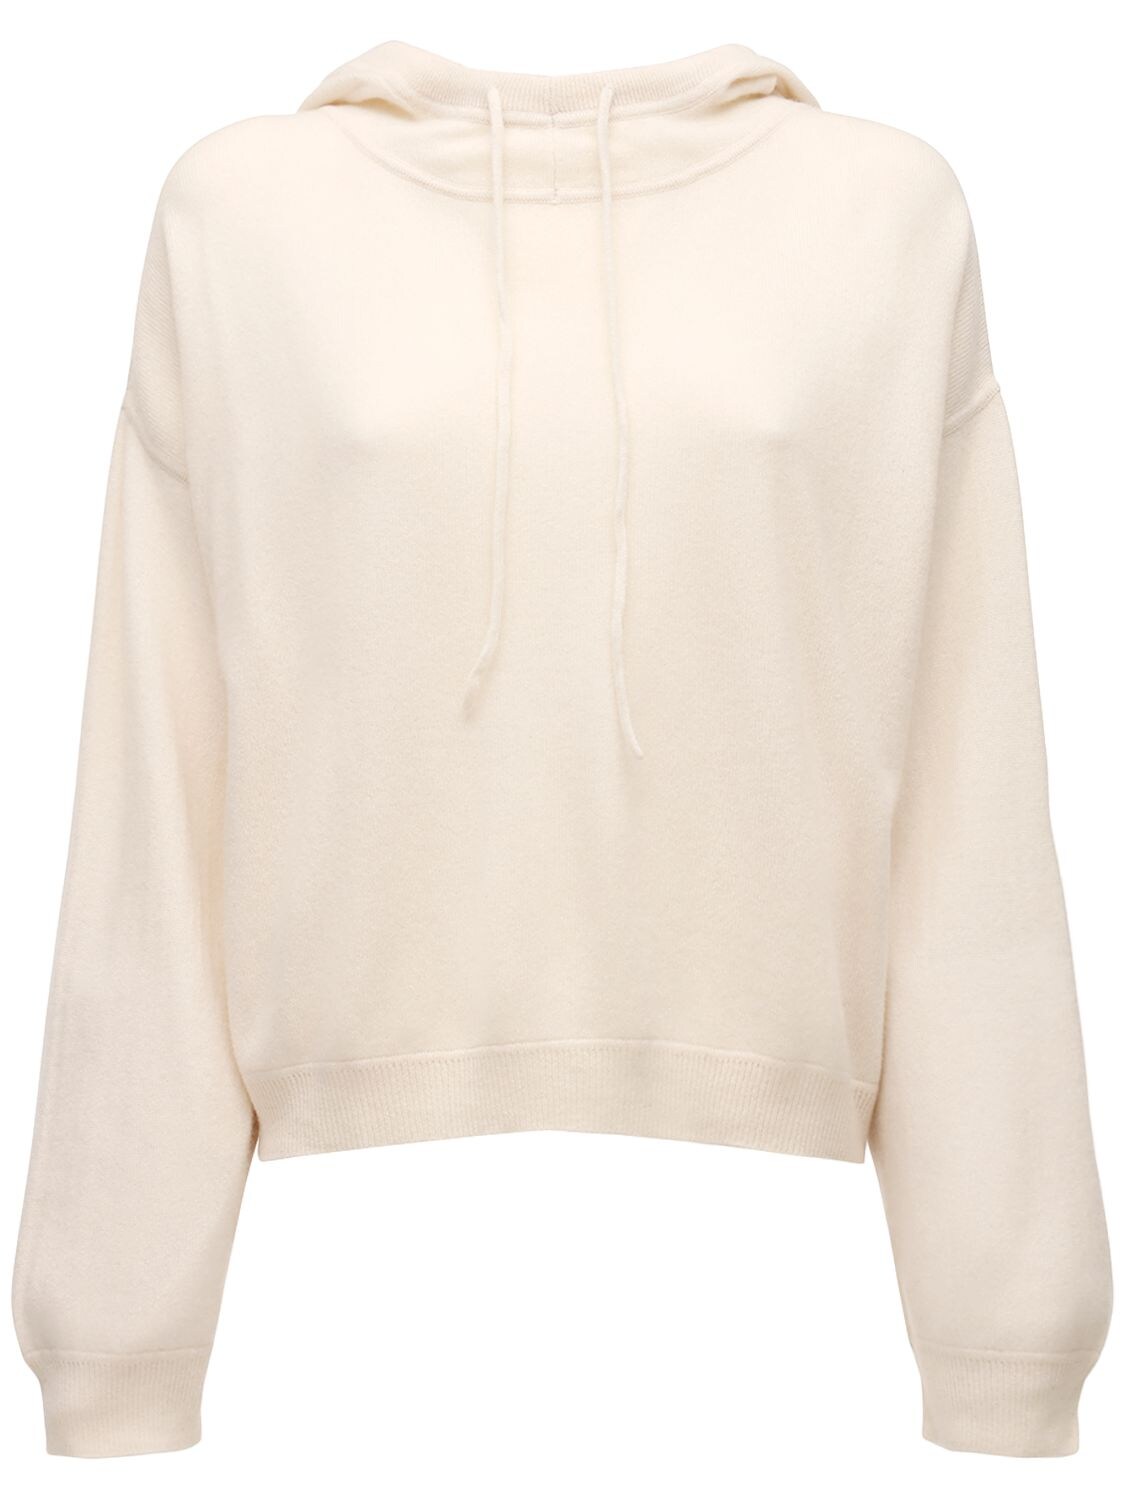 Loulou Studio Linosa Cashmere Knit Sweater In Ivory